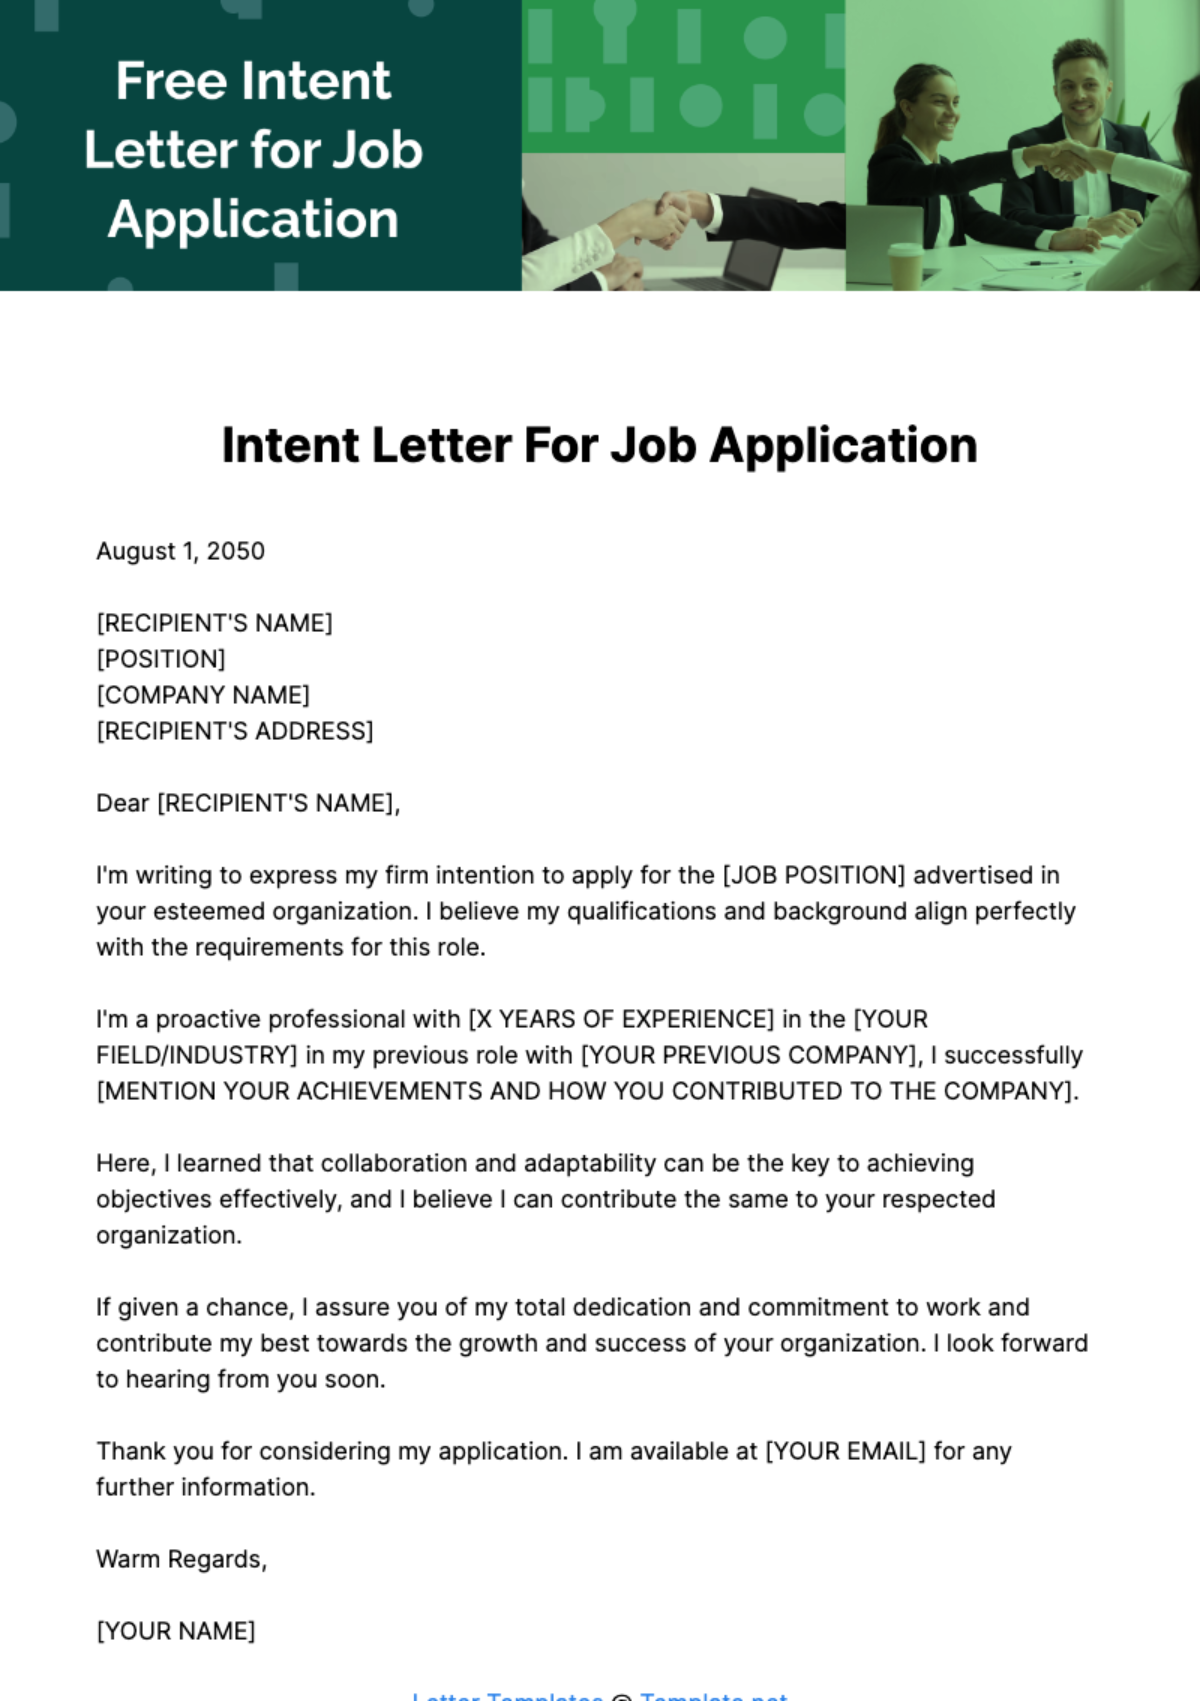 Free Intent Letter for Job Application Template